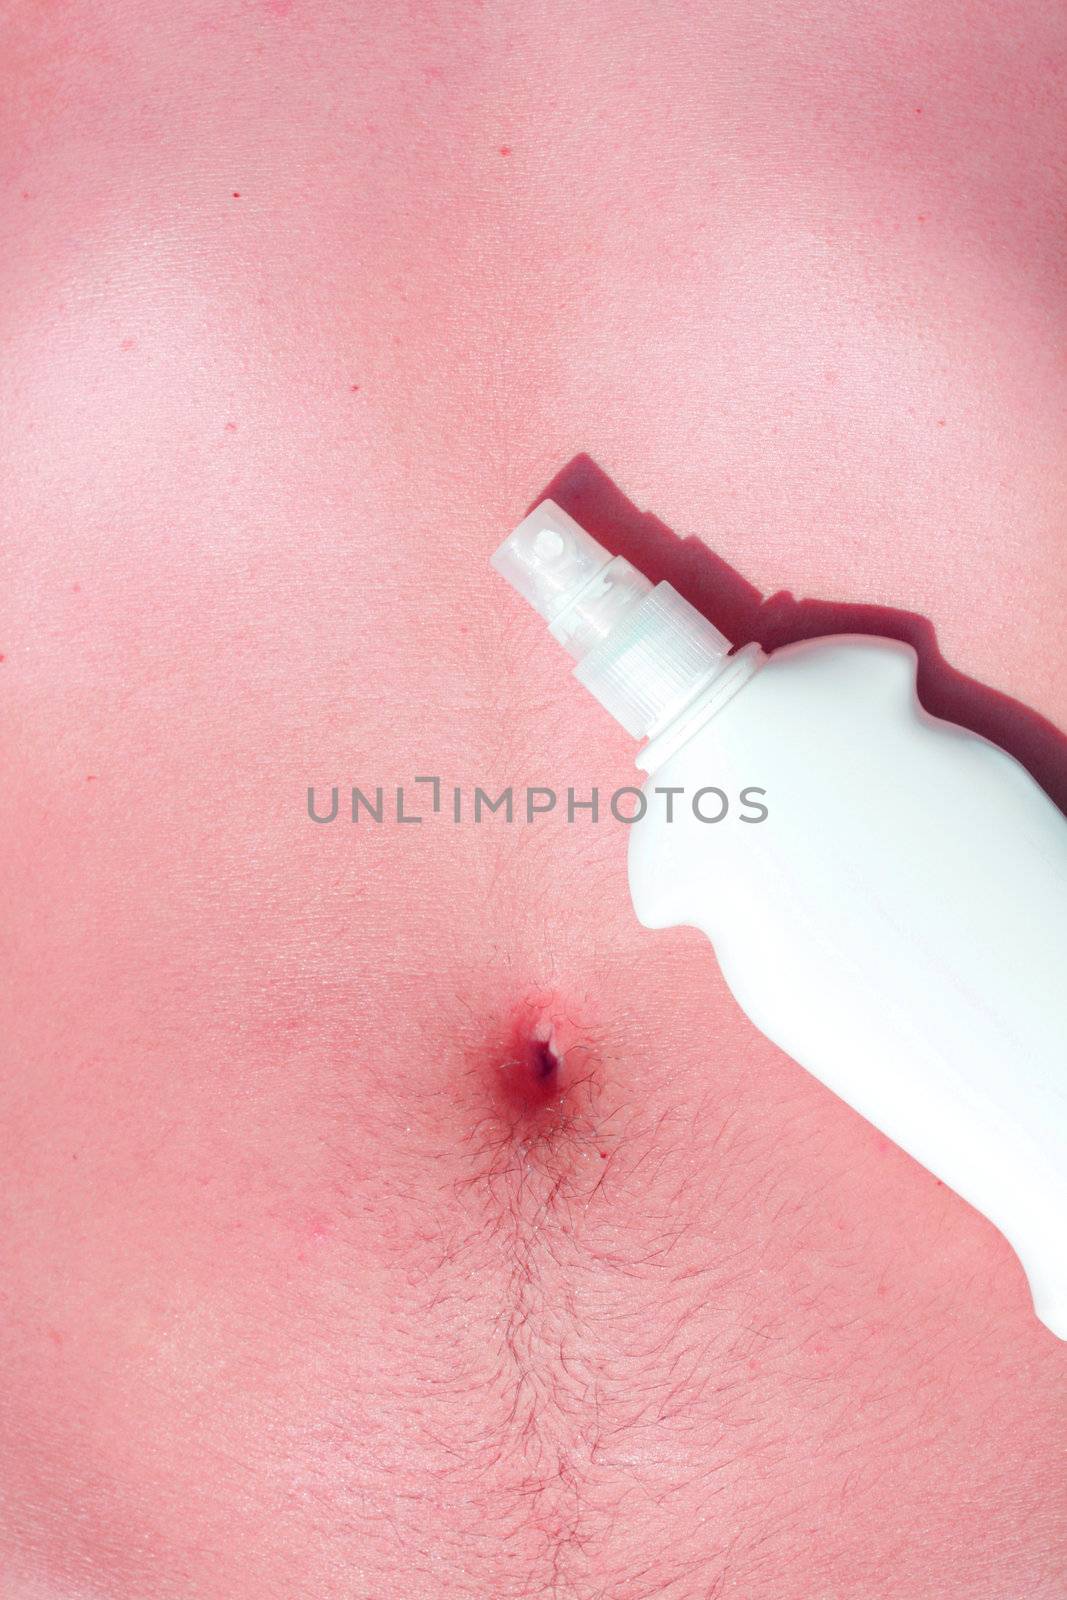 Sunscreen and a male body